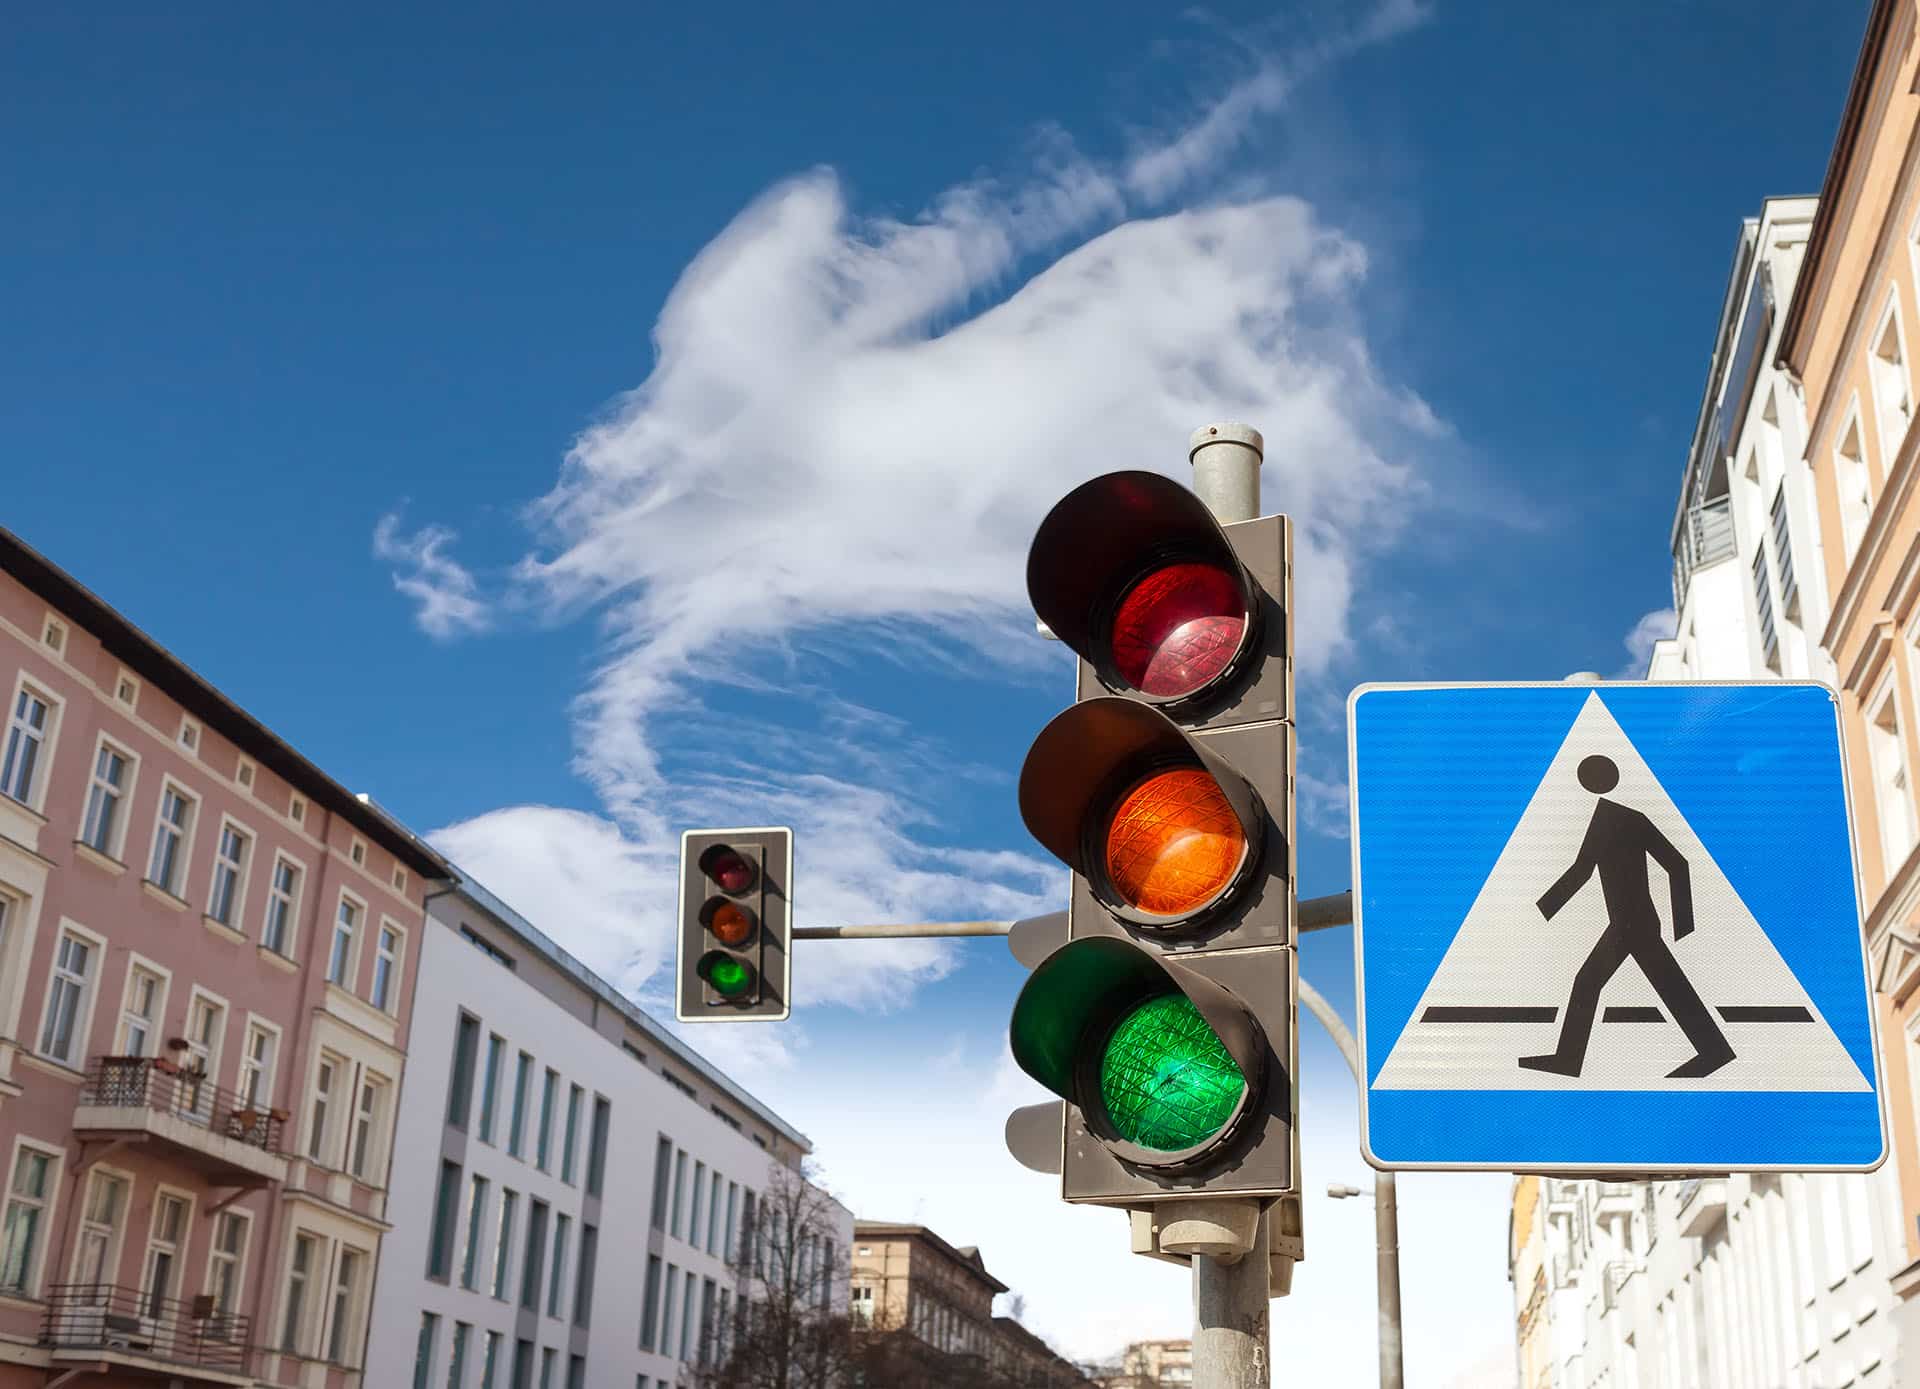 Traffic lights and pedestrian crossing sign in a city.